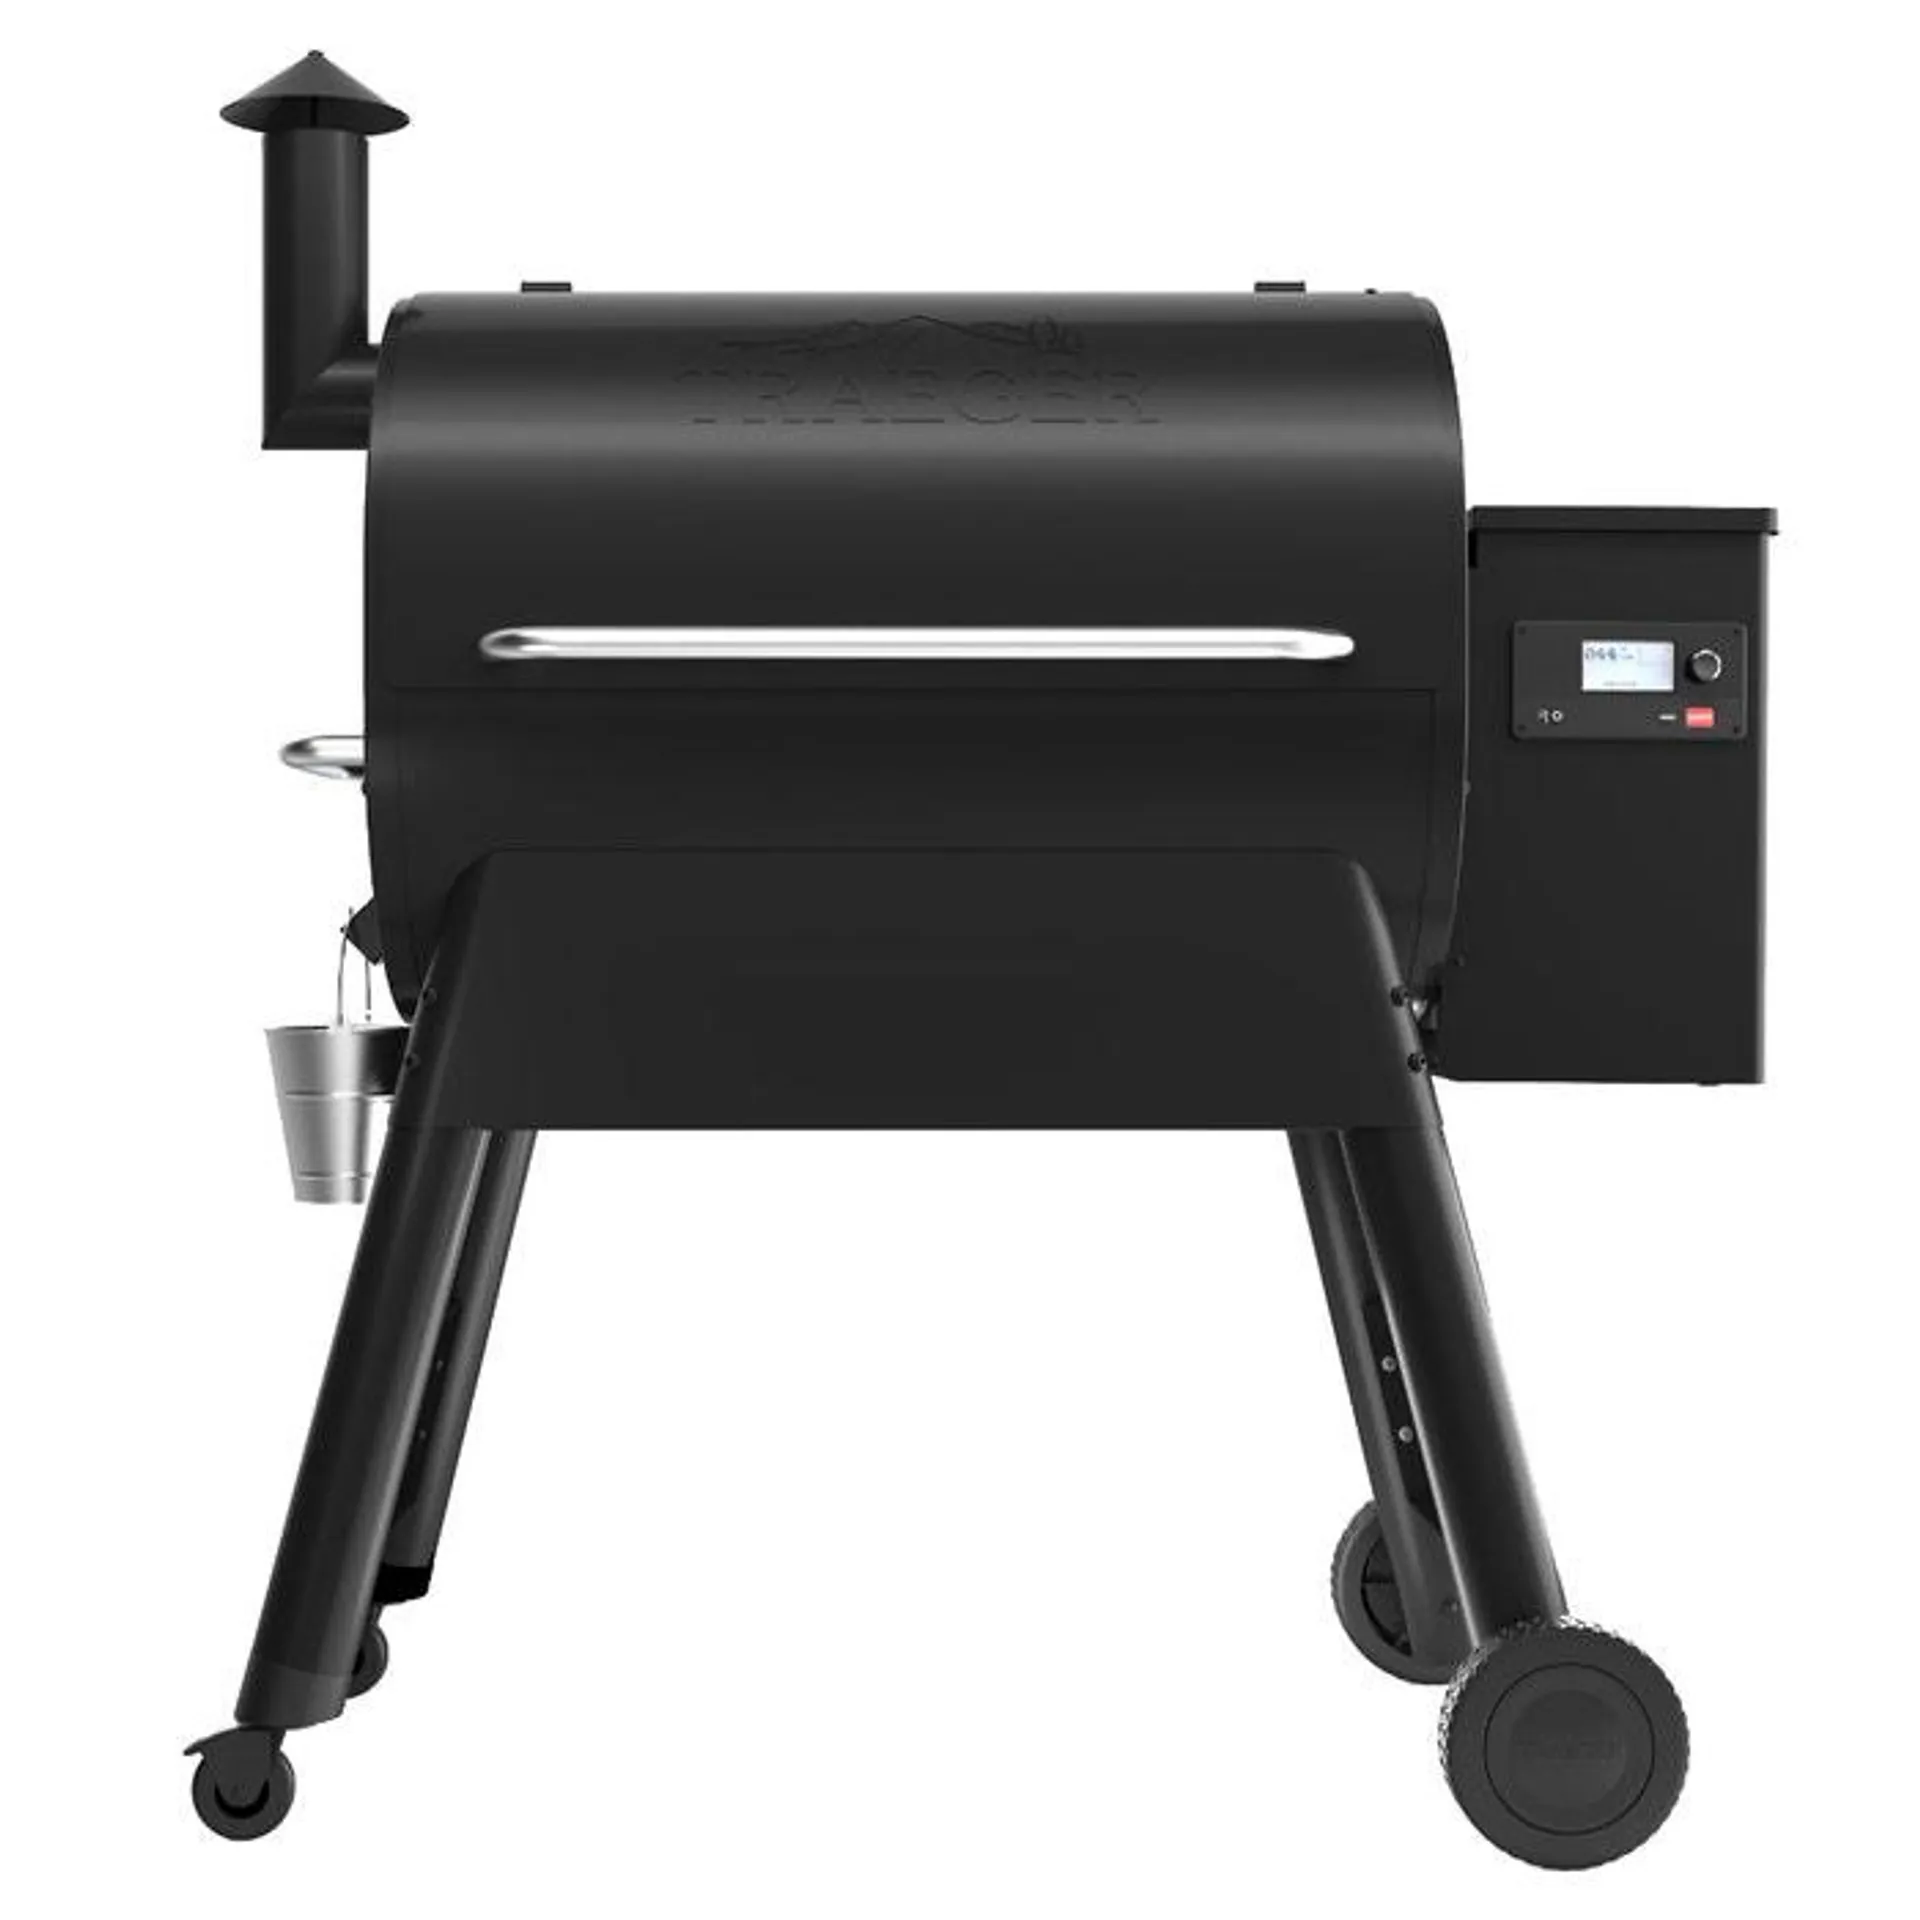 Traeger Pro 780 Wood Pellet Grill (Includes Cover and Pellets)